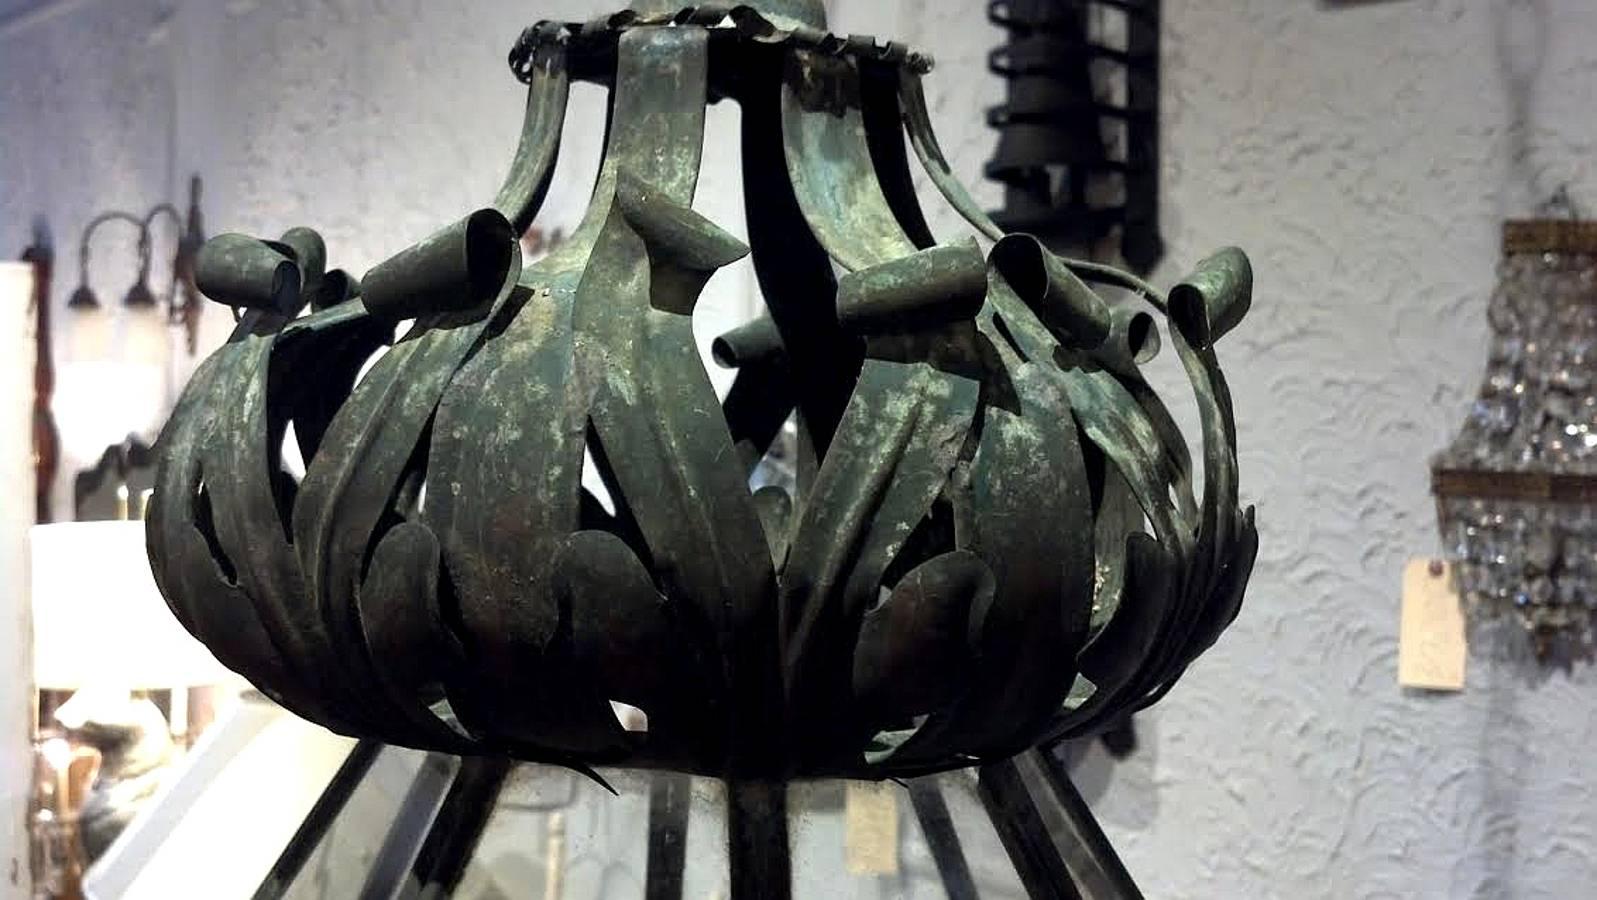 Spectacular eight-sided,  large architectural lanterns made of copper, beautiful patina.
I love the flame detailed crown and unusual decorative details.